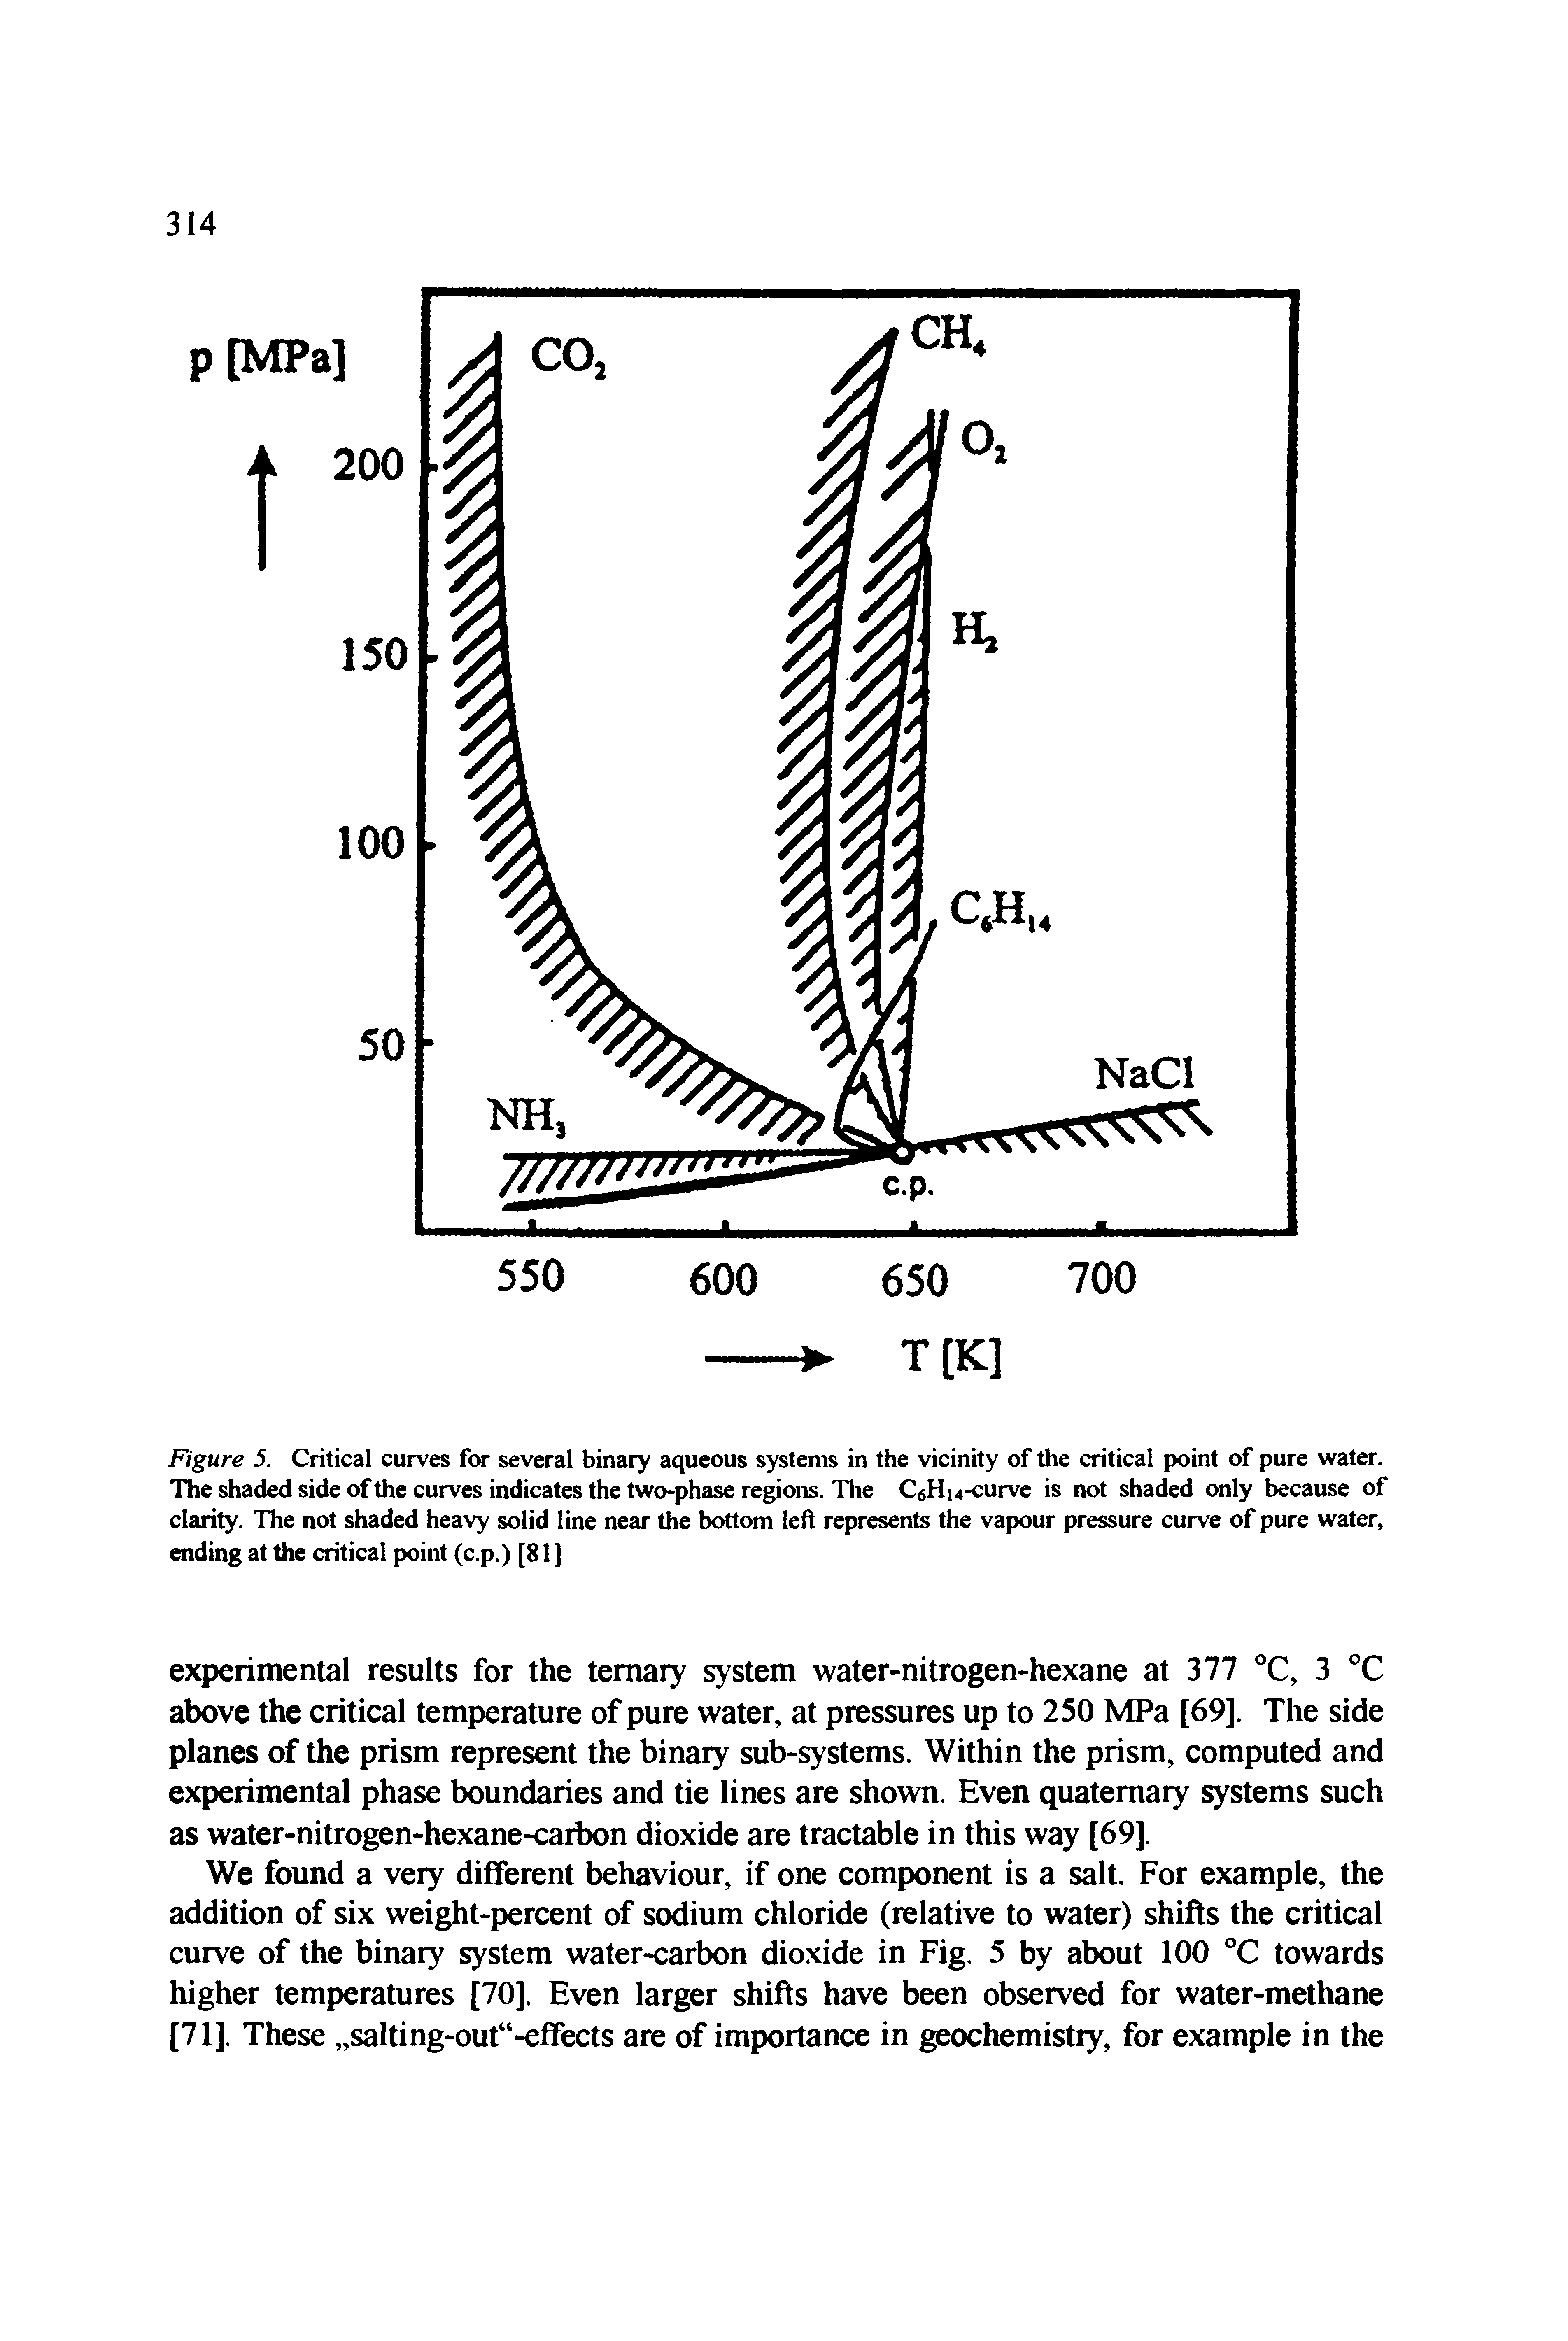 Figure 5. Critical curves for several binary aqueous systems in the vicinity of the critical point of pure water. The shaded side of the curves indicates the two-phase regions. Tlie CeHn-curve is not shaded only because of clarity. The not shaded heavy solid line near the bottom left represents the vapour pressure curve of pure water, ending at the critical point (c.p.) [81]...